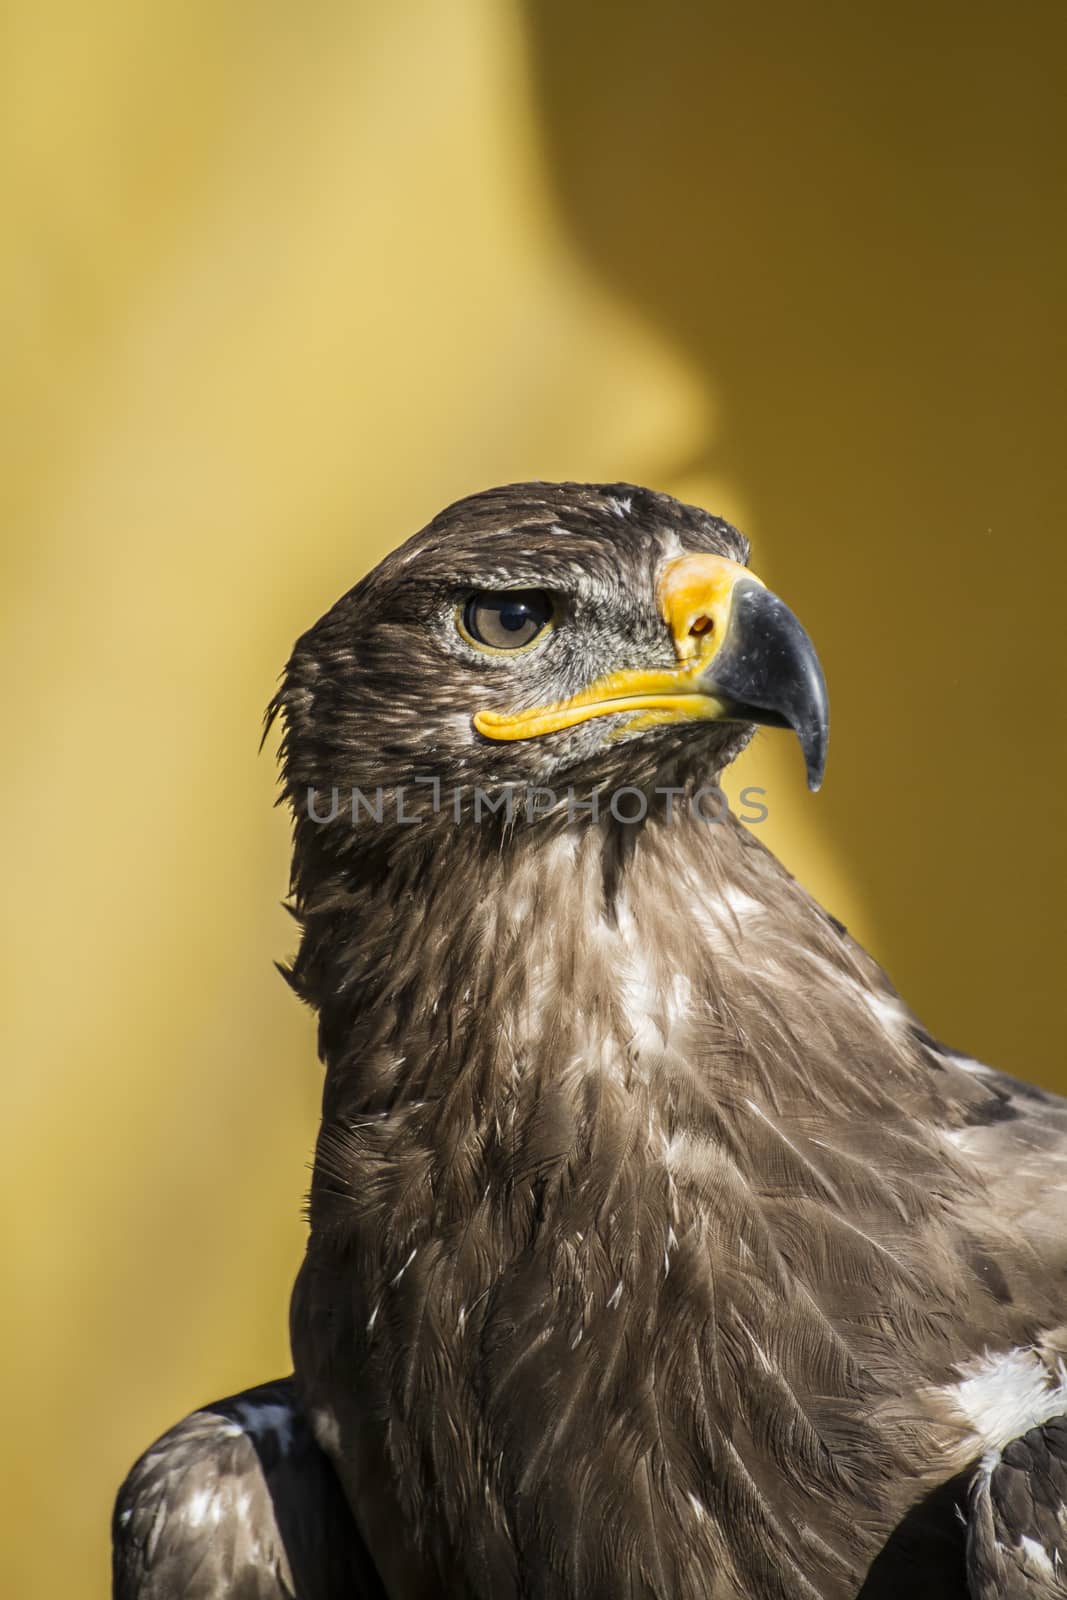 beautiful golden eagle, detail of head with large eyes, pointed beak